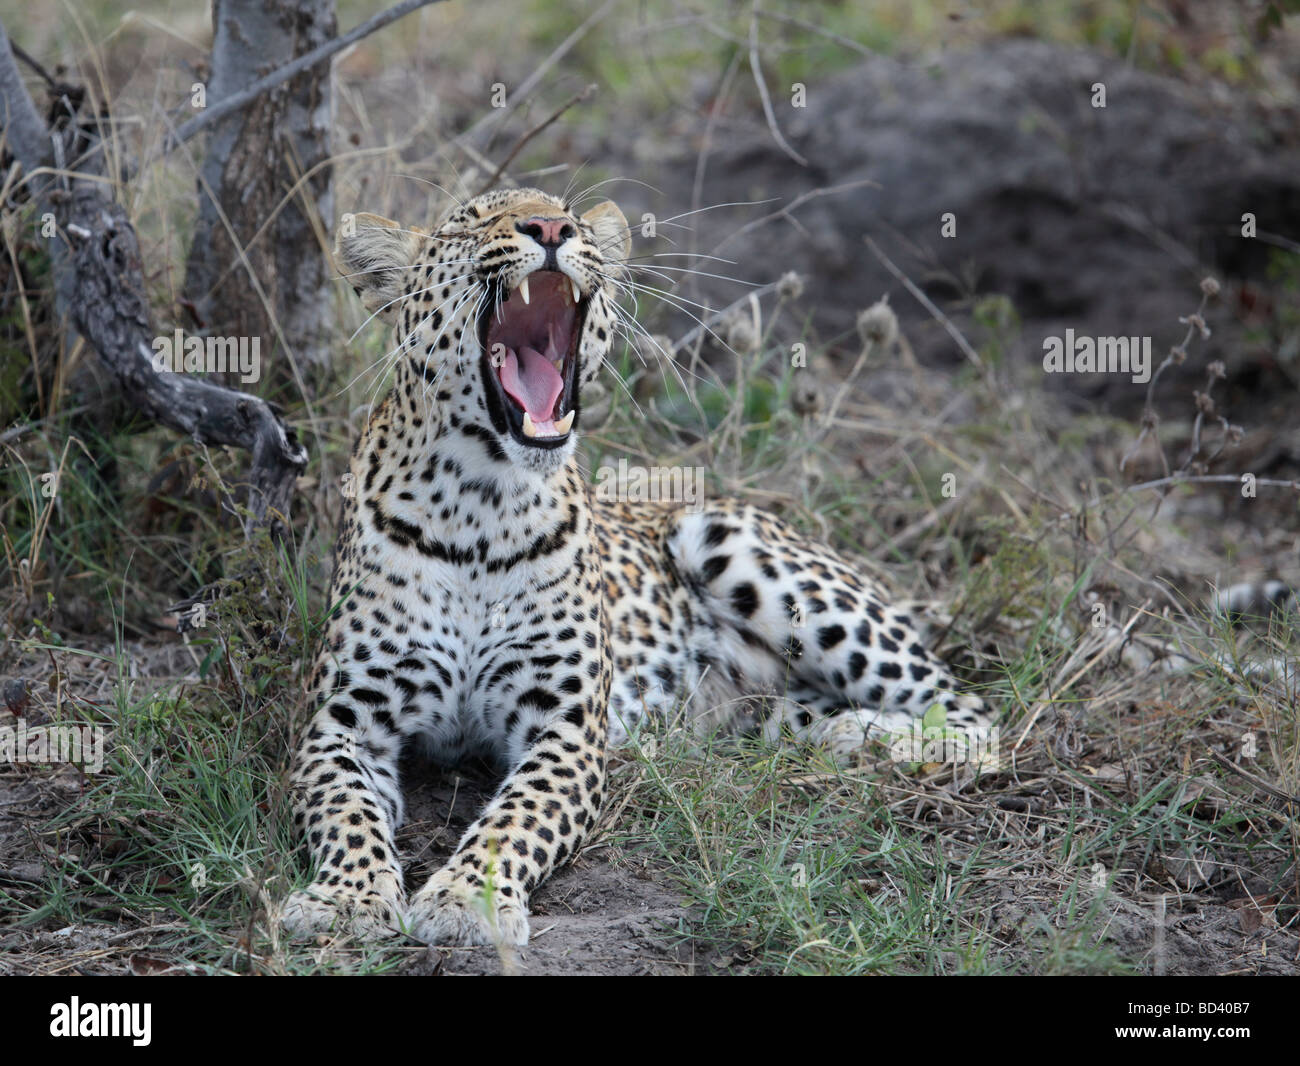 Female Leopard yawning, showing its 'fangs' (canines). Photographed in the Savute/Savuti area of Chobe National Park, Botswana Stock Photo